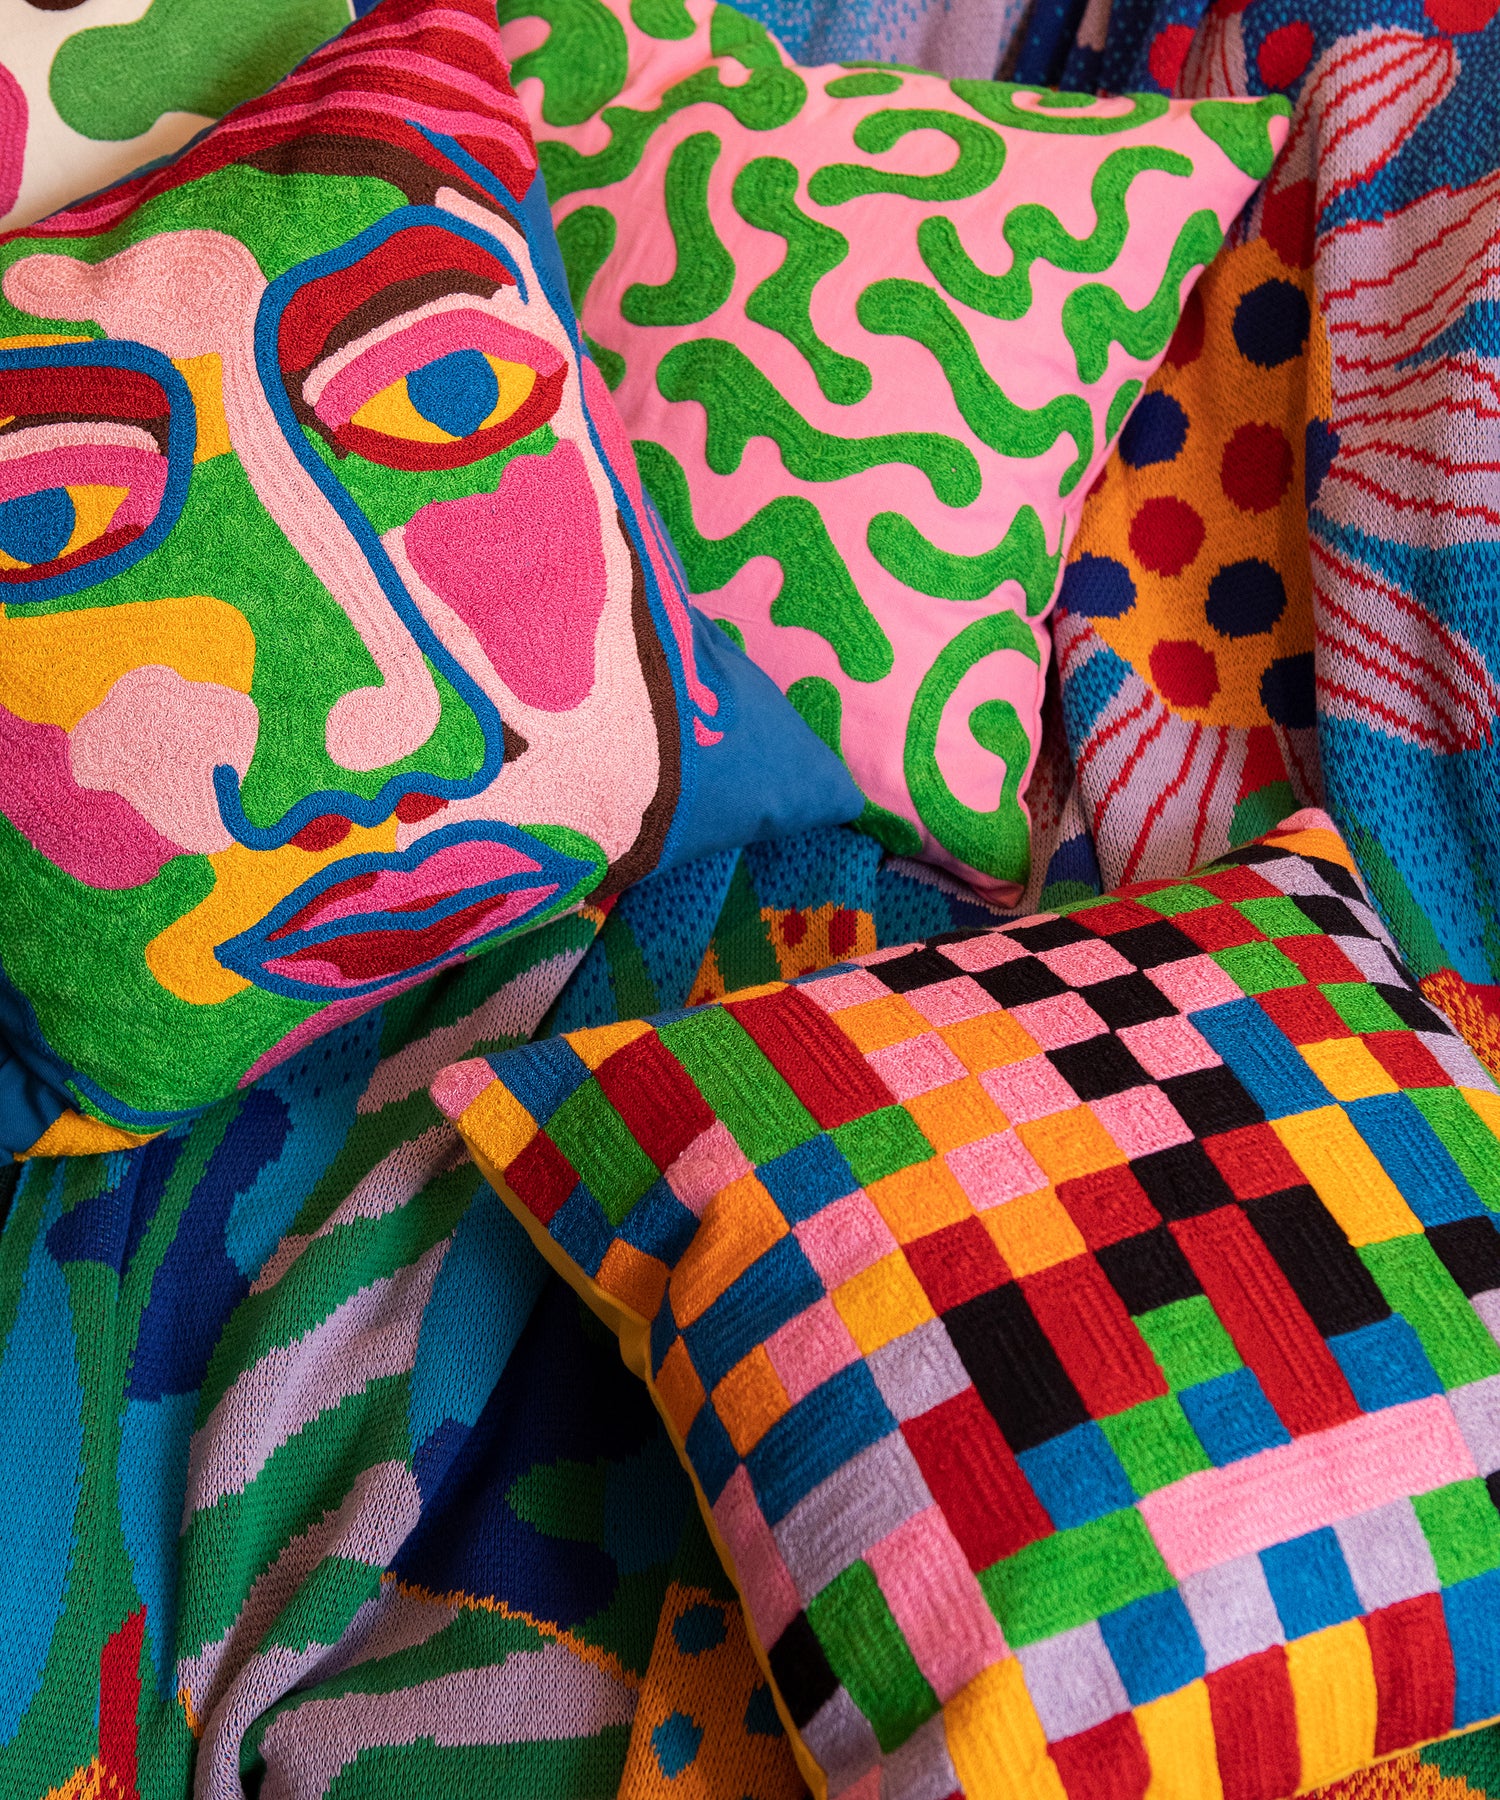 Detail of Portrait Pillow laying on top of the Best Buds Blanket next to the Pixels and Silly Squiggles Pillows.